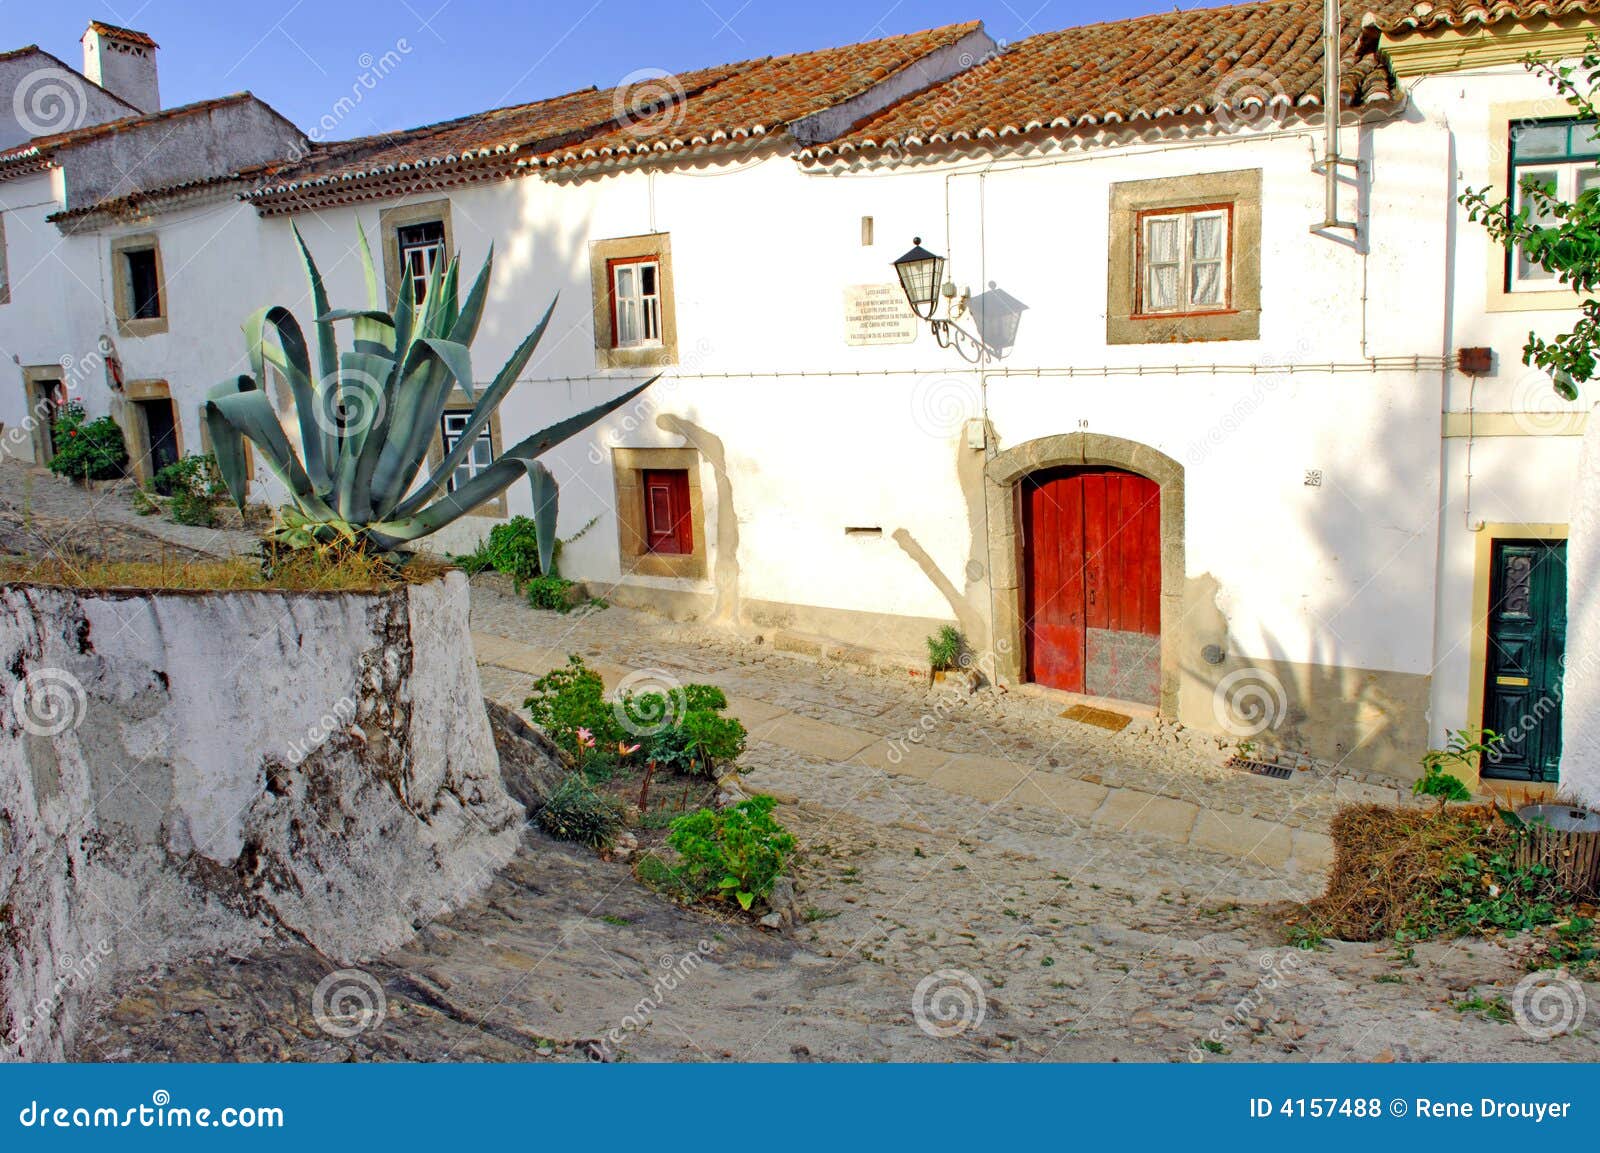 portugal, area of alentejo, marvao: typical house